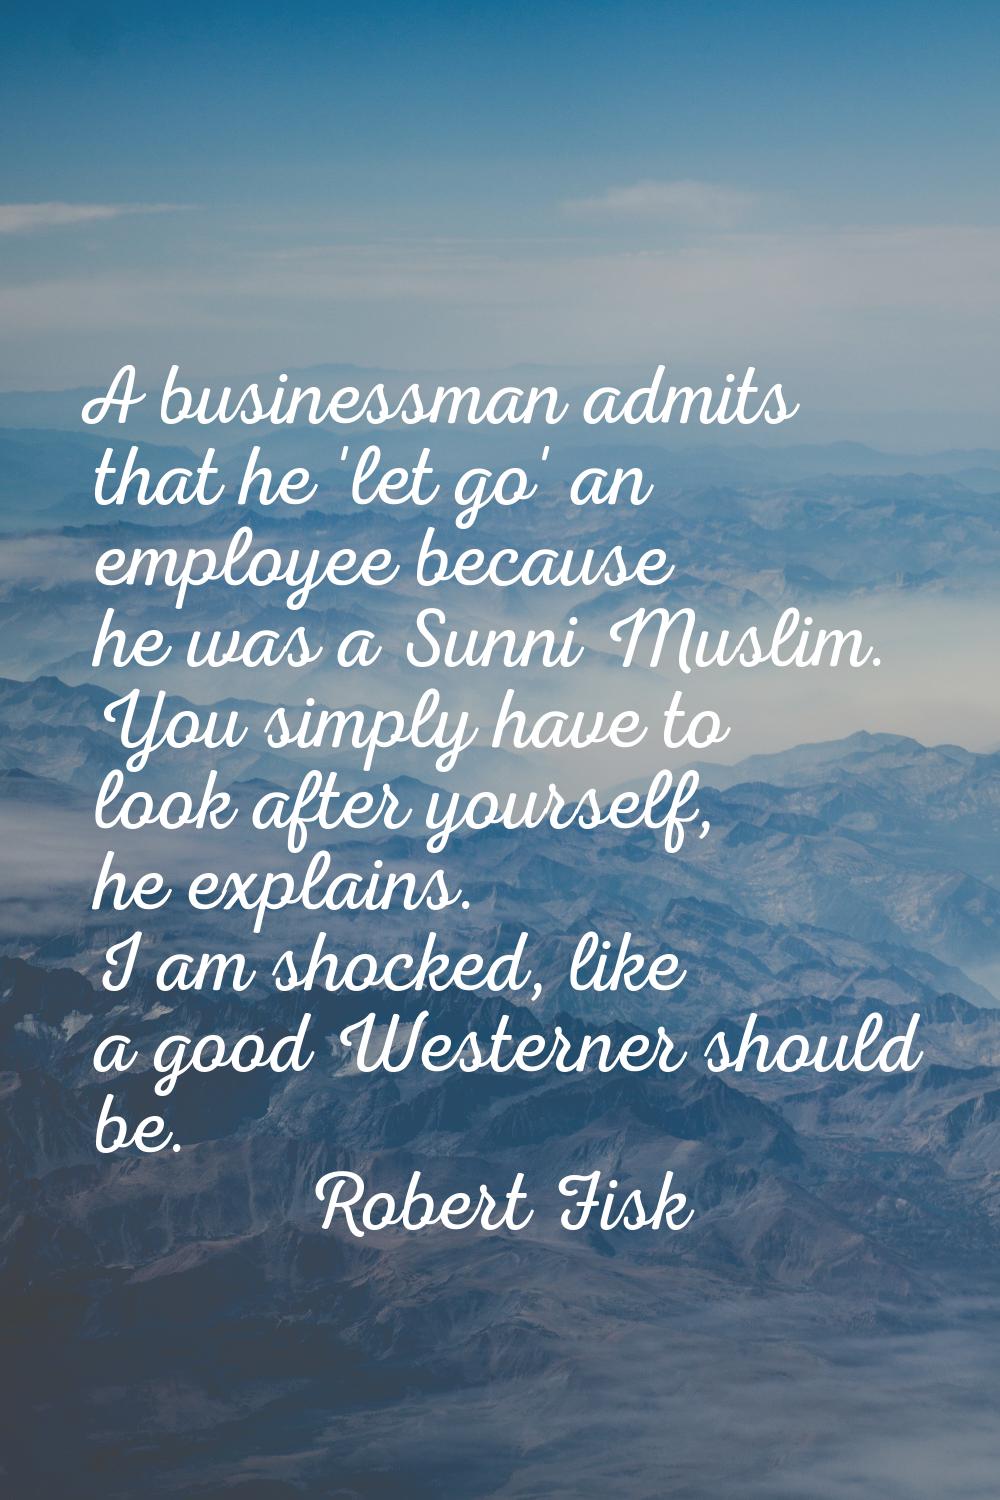 A businessman admits that he 'let go' an employee because he was a Sunni Muslim. You simply have to